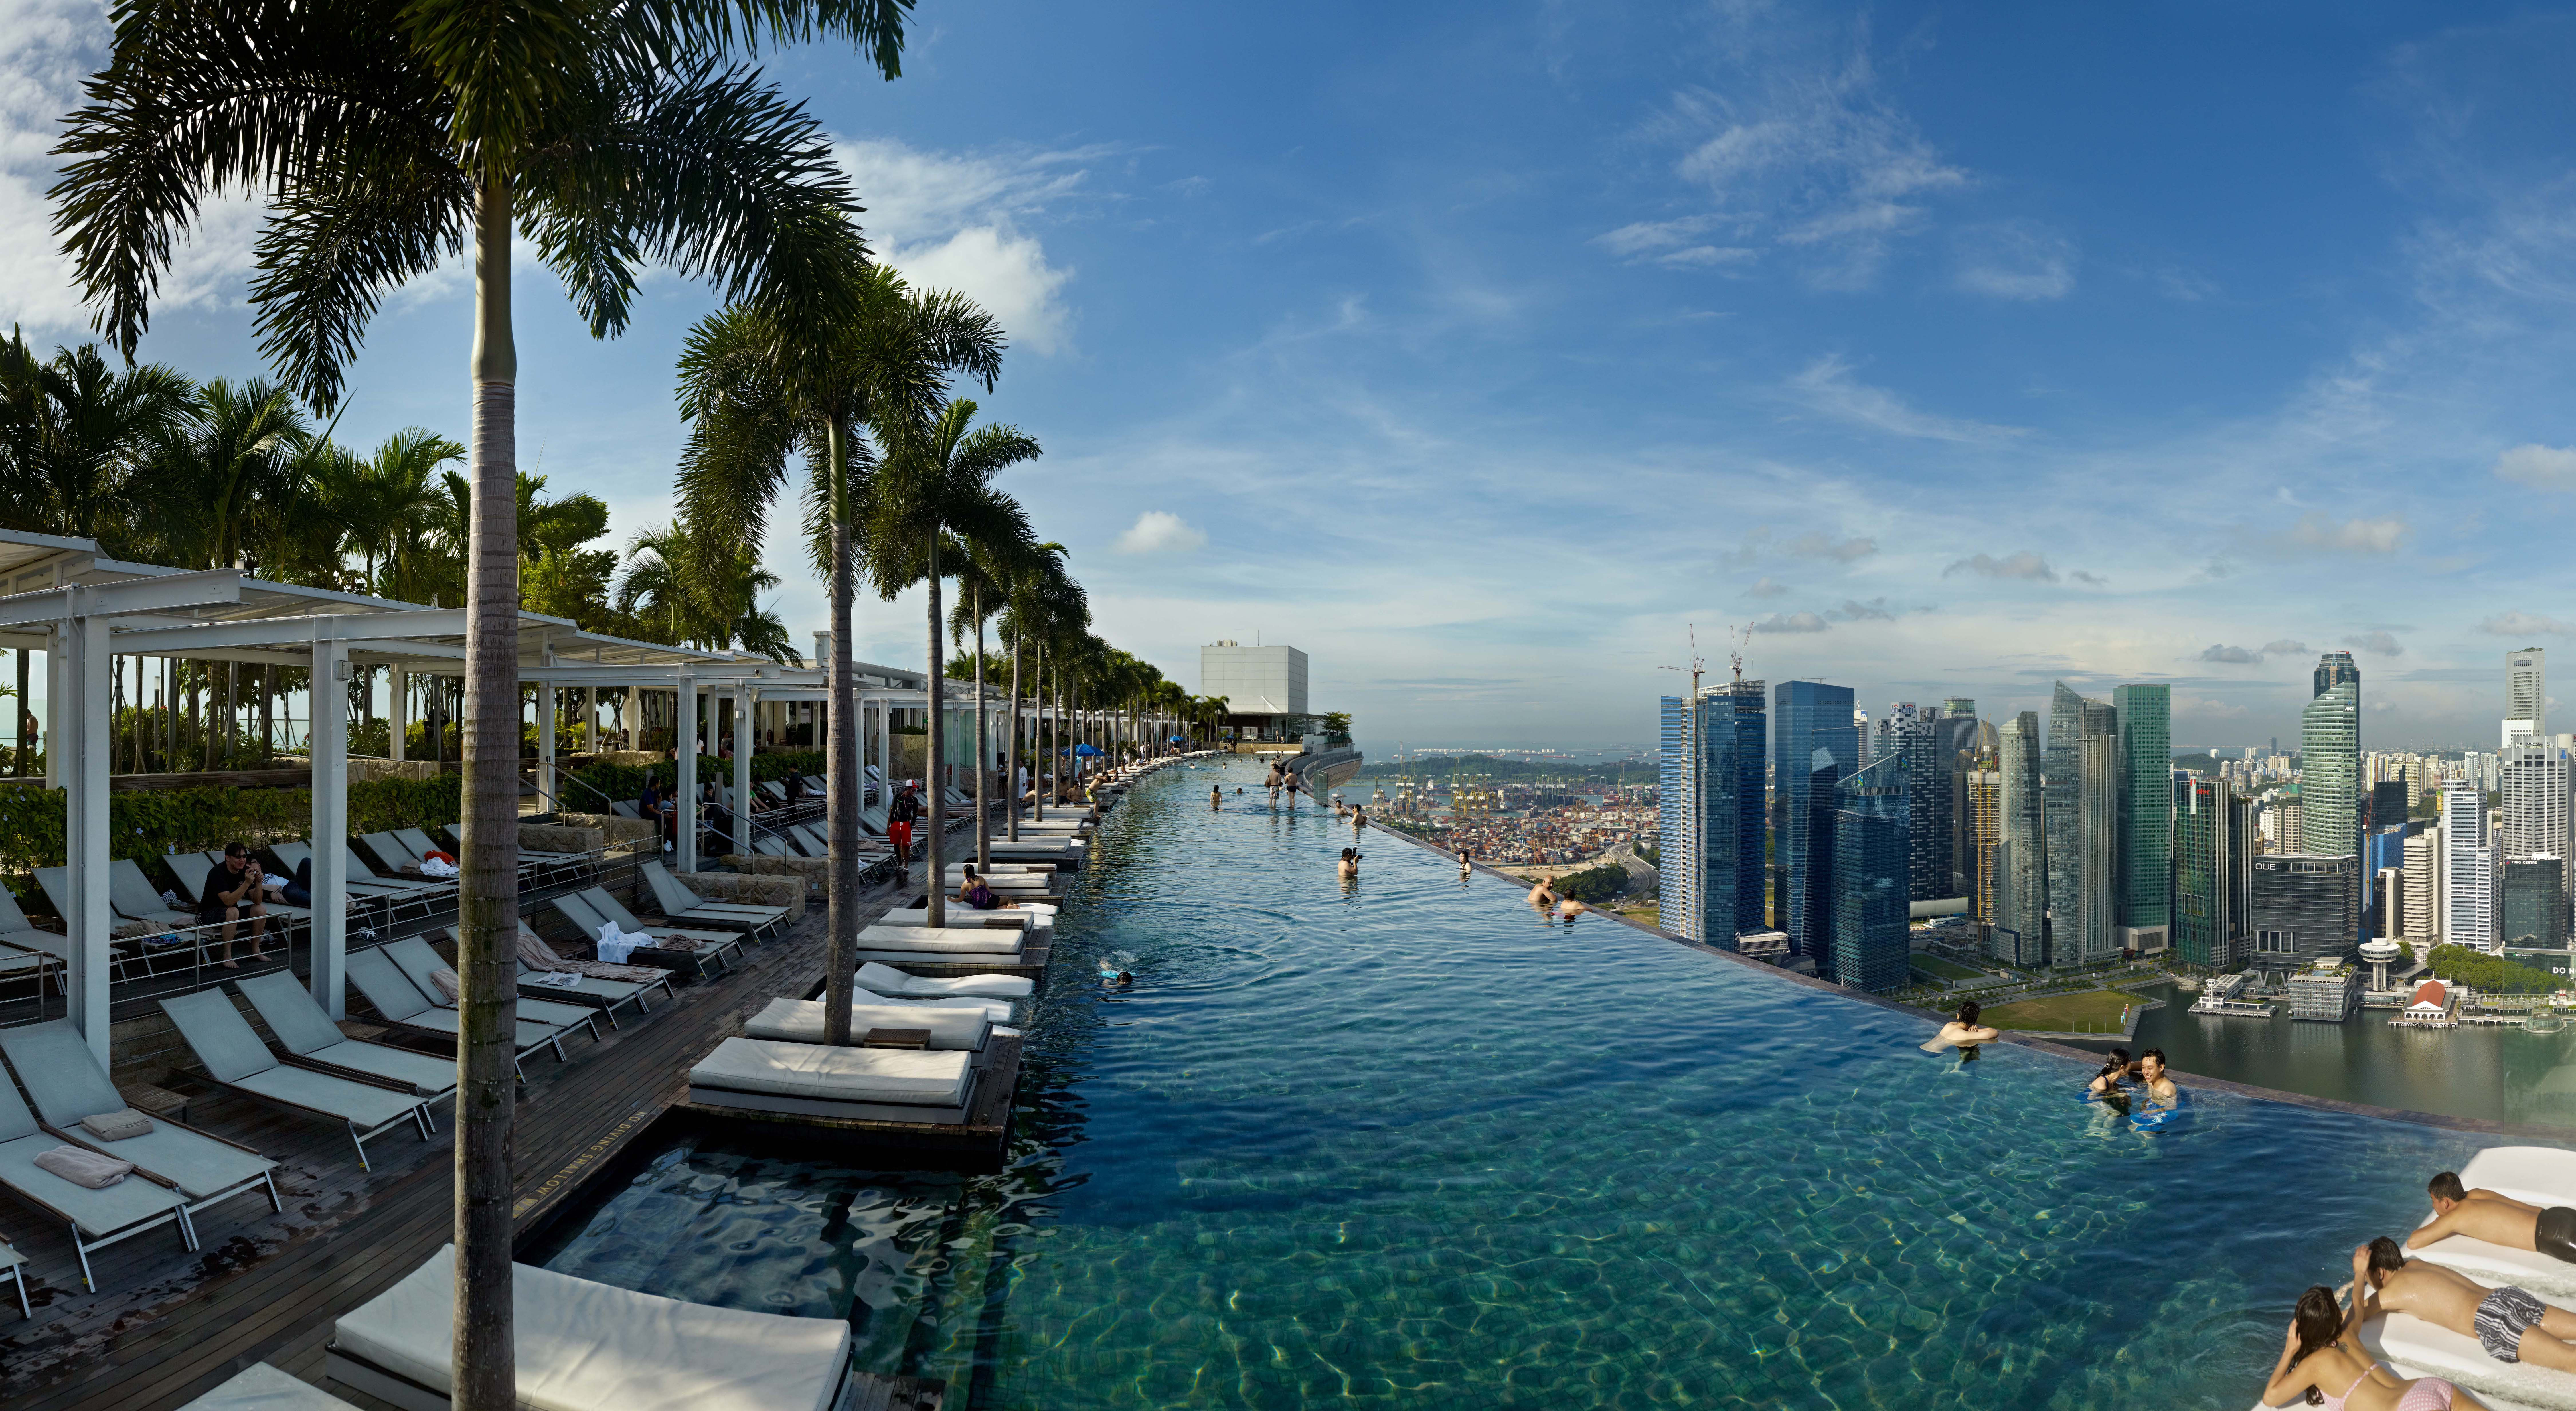  infinity pool in singapore